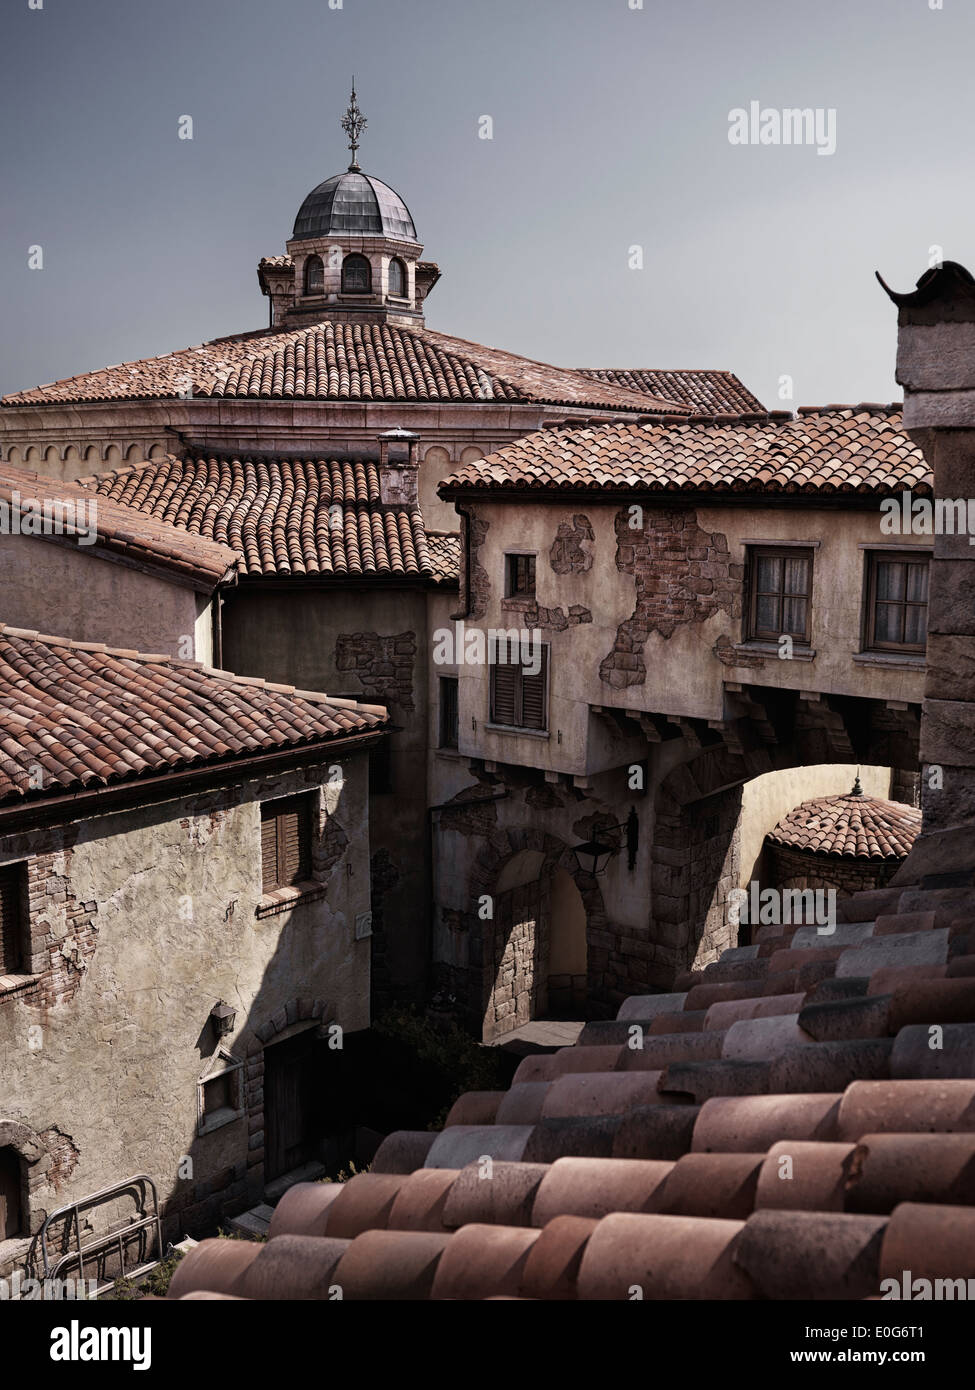 Tiled rooftops of old houses in a town built in Venetian architectural style at Tokyo Disneysea Stock Photo